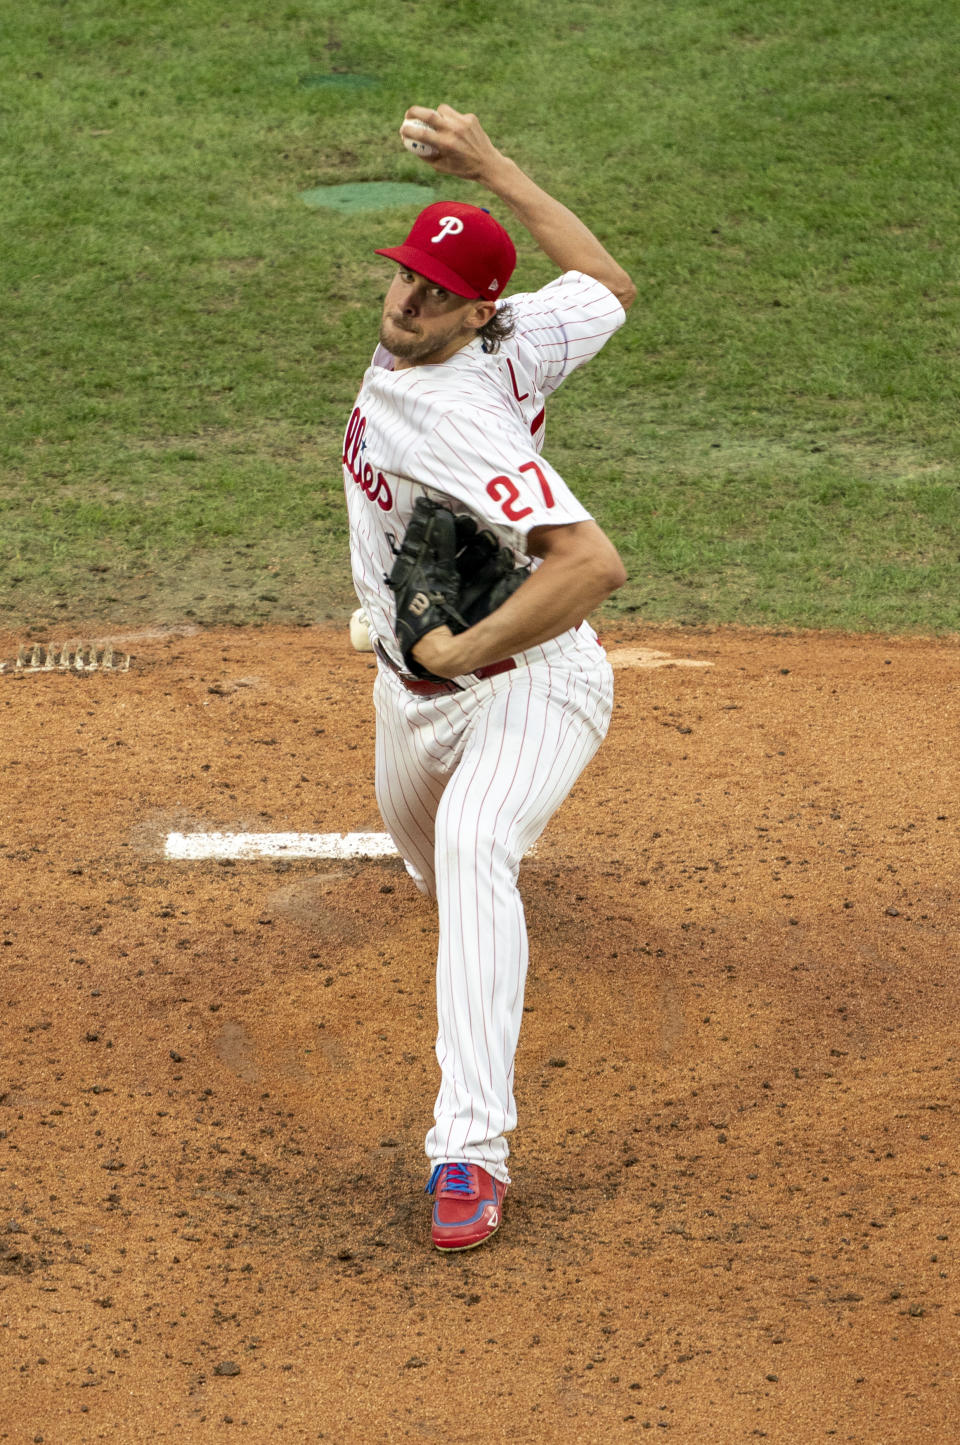 Philadelphia Phillies starting pitcher Aaron Nola throws a pitch during the third inning of a baseball game against the New York Mets, Saturday, Aug. 15, 2020, in Philadelphia. (AP Photo/Chris Szagola)